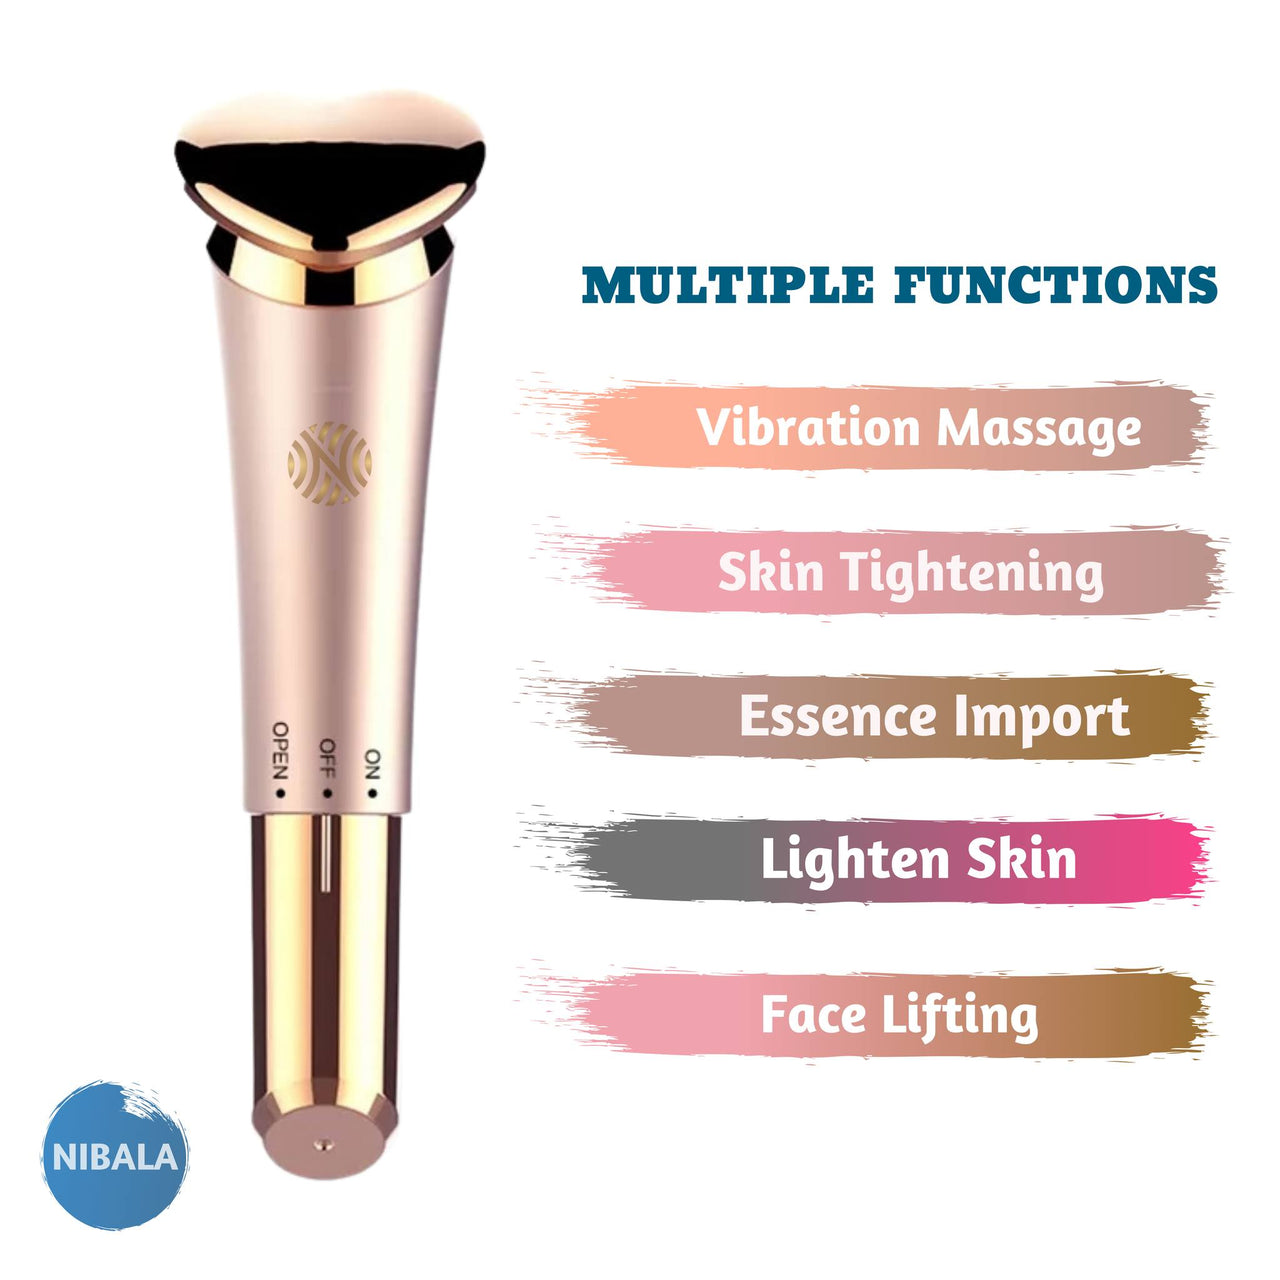 Multifunctional face lifting massager for facial and skin care